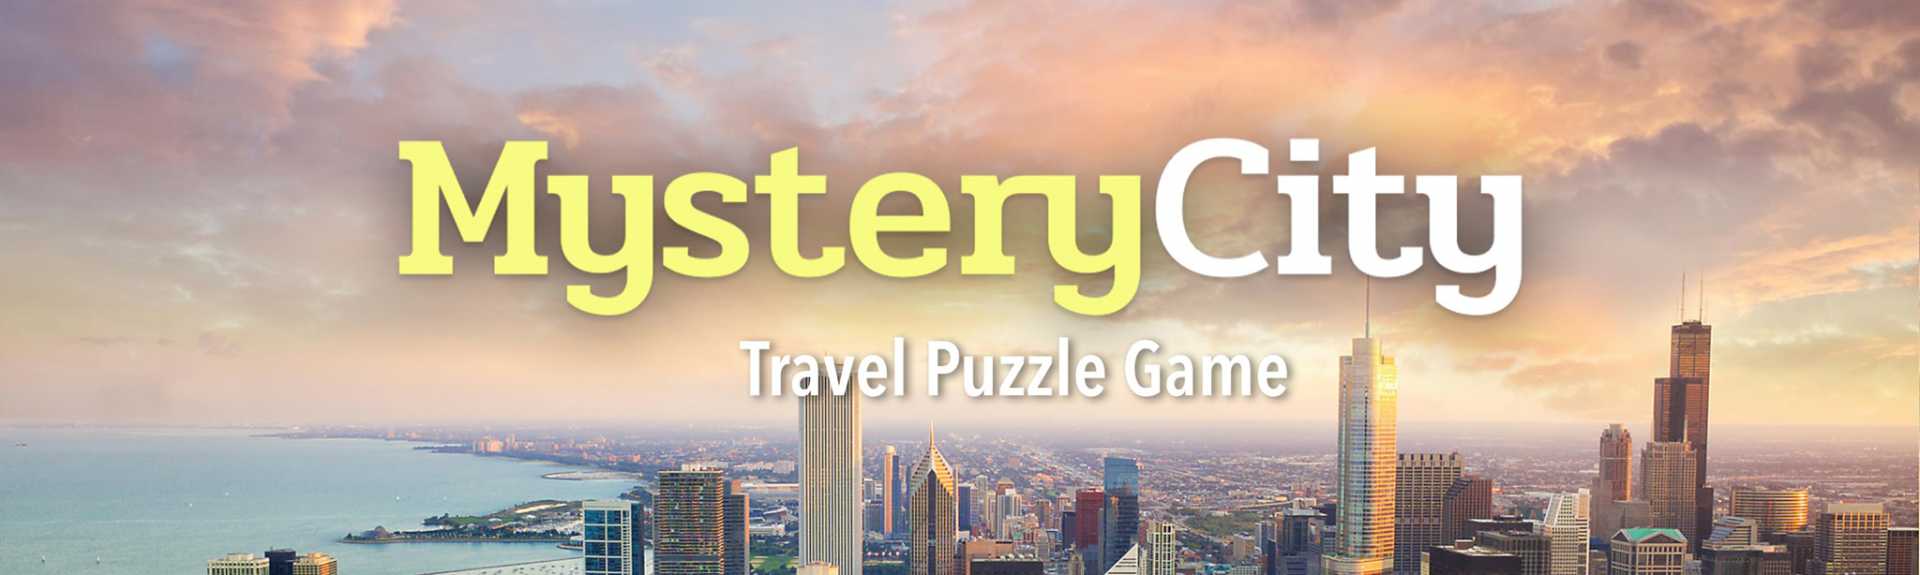 Mystery City - Travel Puzzle Game